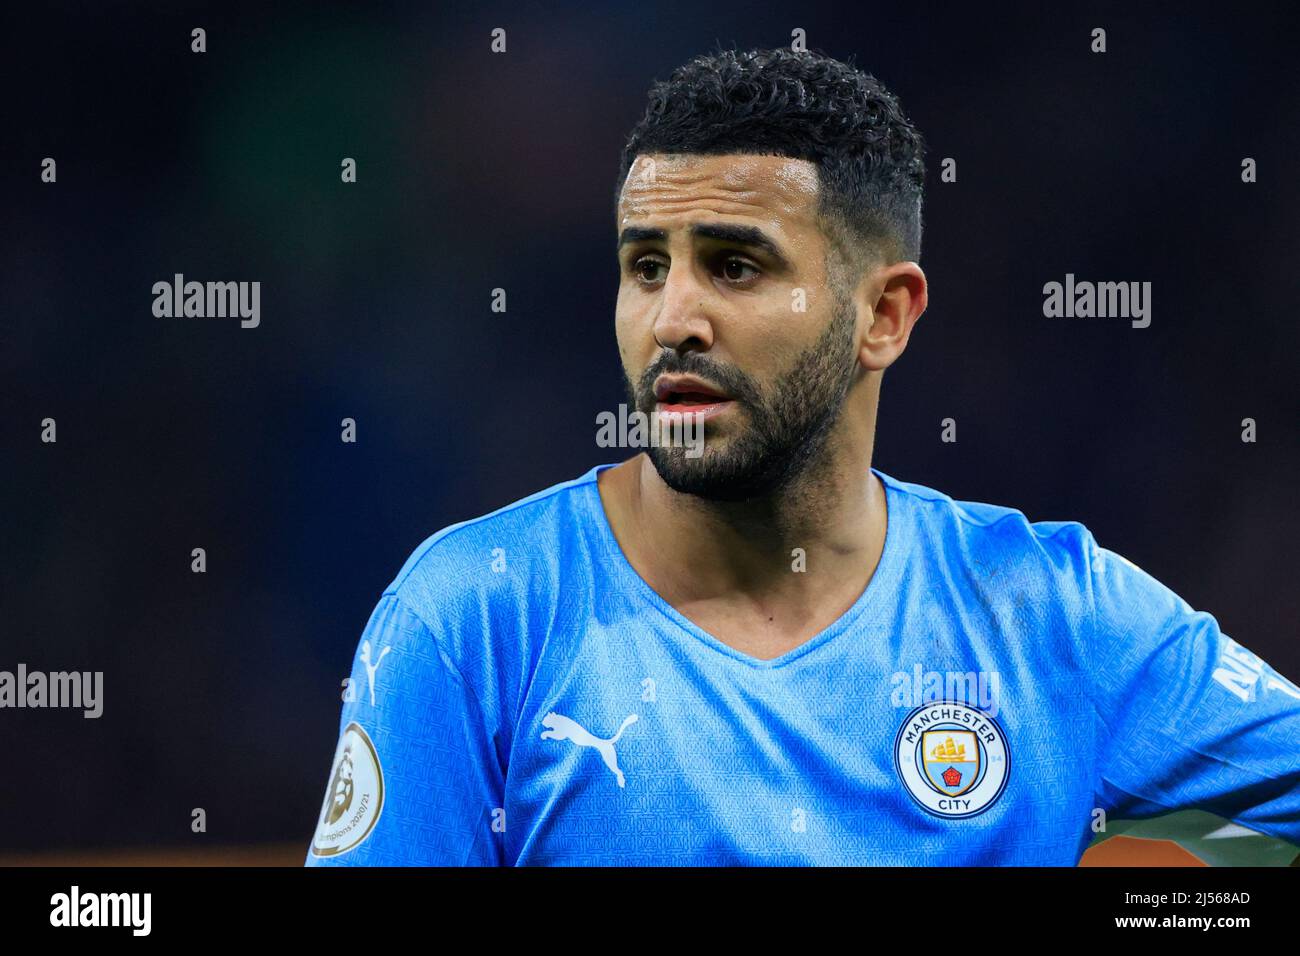 Manchester, UK. 20th Apr, 2022. Riyad Mahrez #26 of Manchester City in Manchester, United Kingdom on 4/20/2022. (Photo by Conor Molloy/News Images/Sipa USA) Credit: Sipa USA/Alamy Live News Stock Photo